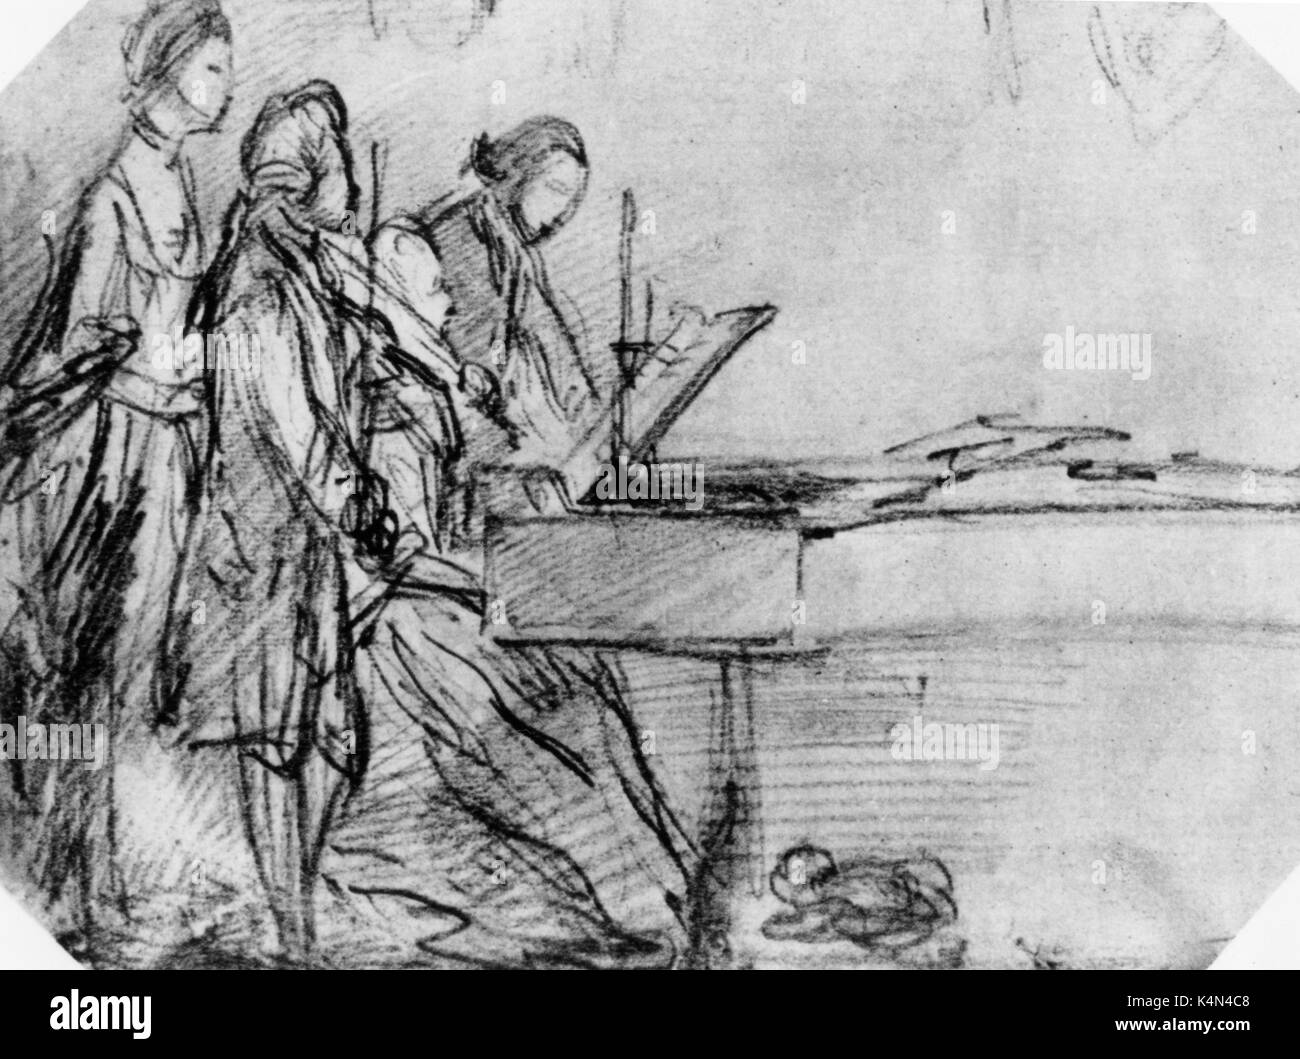 Harpsichord, Violin & Singers Singers accompanied by Harpsicord and Violin . After sketch by Thomas Gainsborough (1727  - 1788).  18th century - Late Romantic. Stock Photo